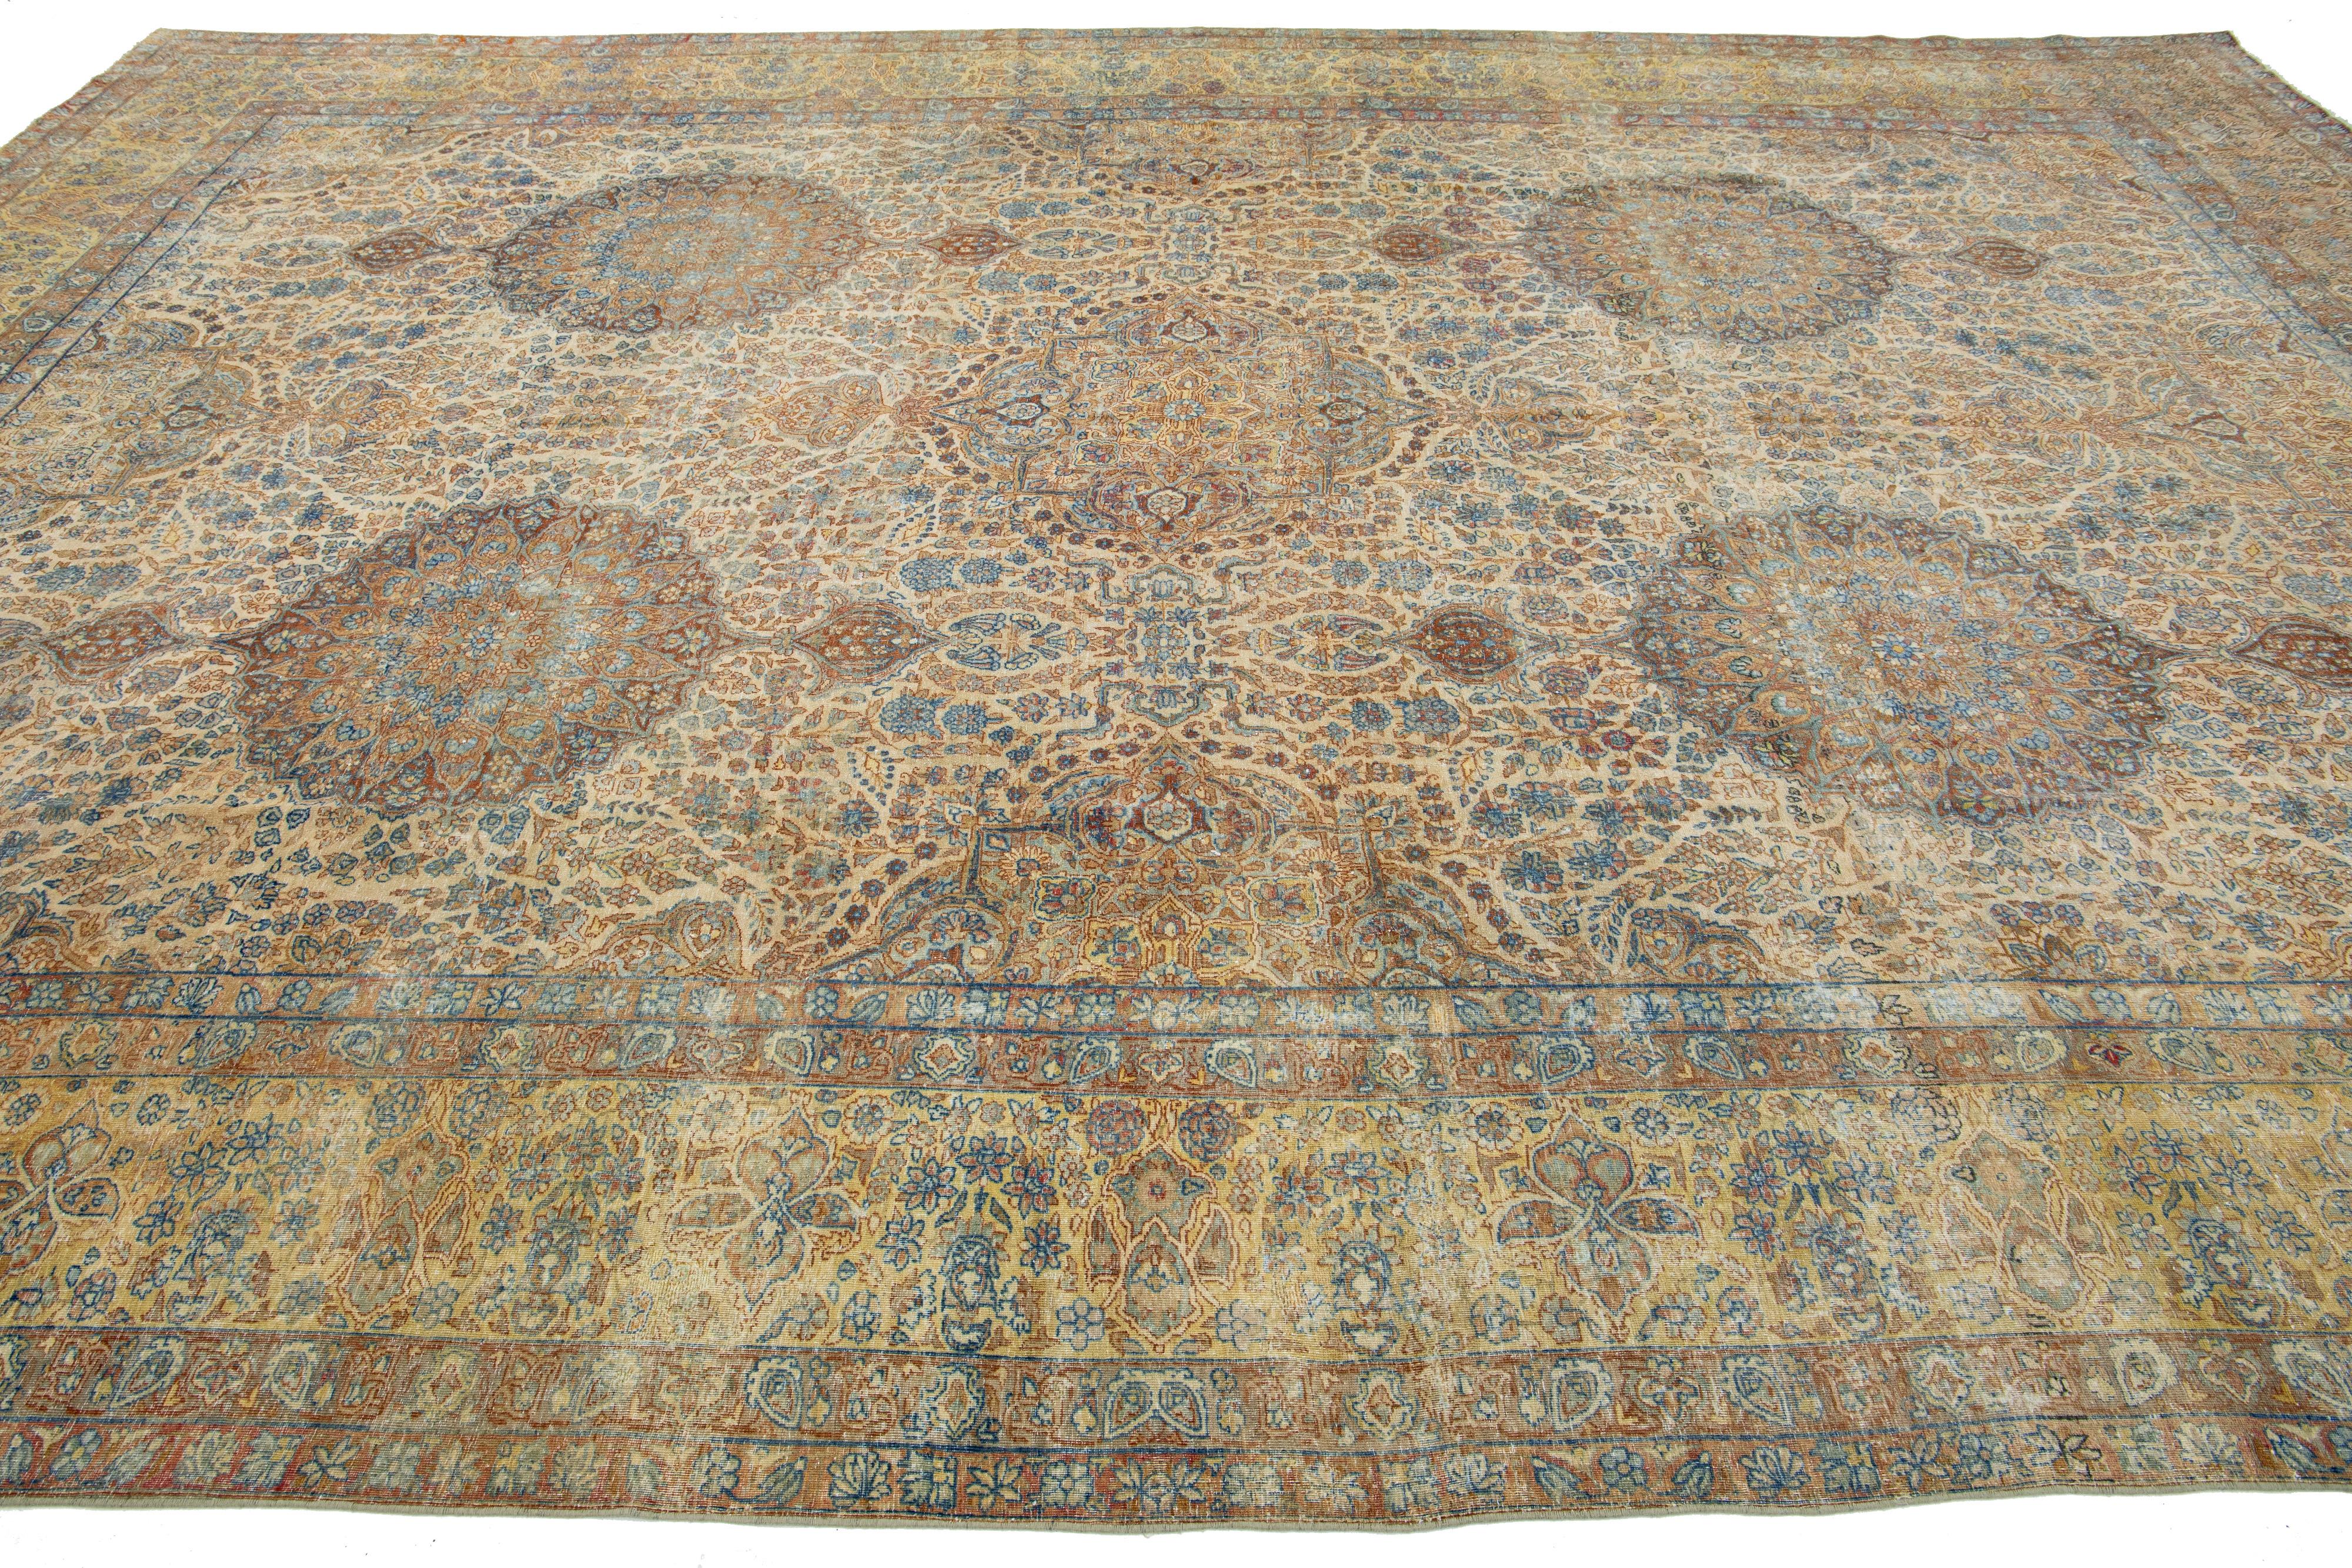 1910s Antique Kerman Persian Wool Rug with Multicolor Rosette Motif  In Good Condition For Sale In Norwalk, CT